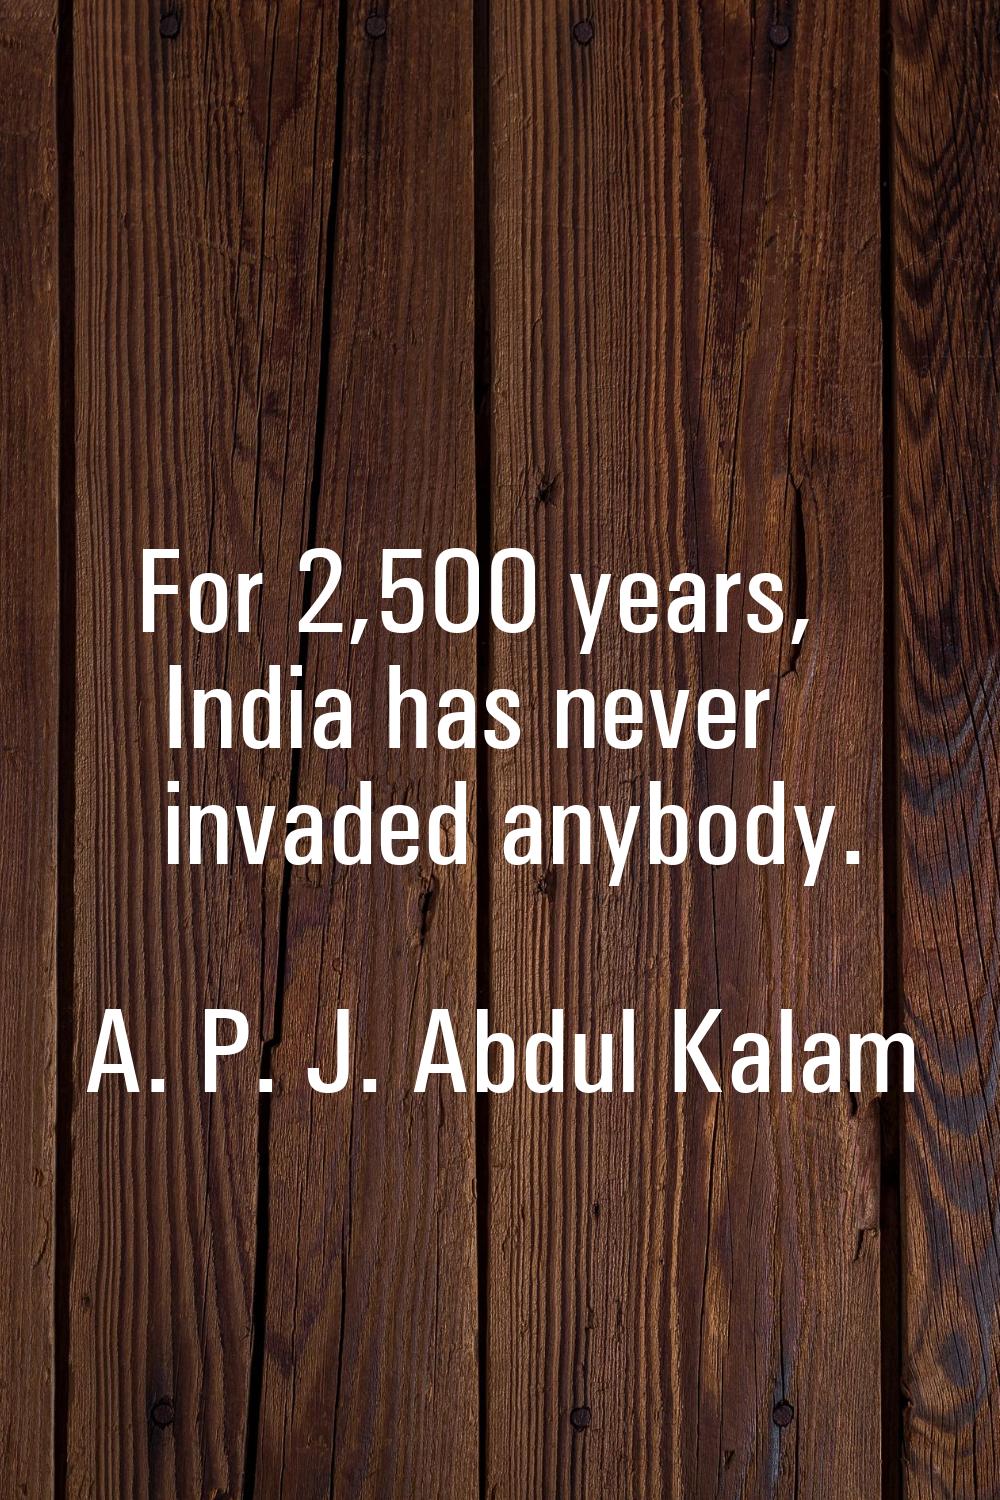 For 2,500 years, India has never invaded anybody.